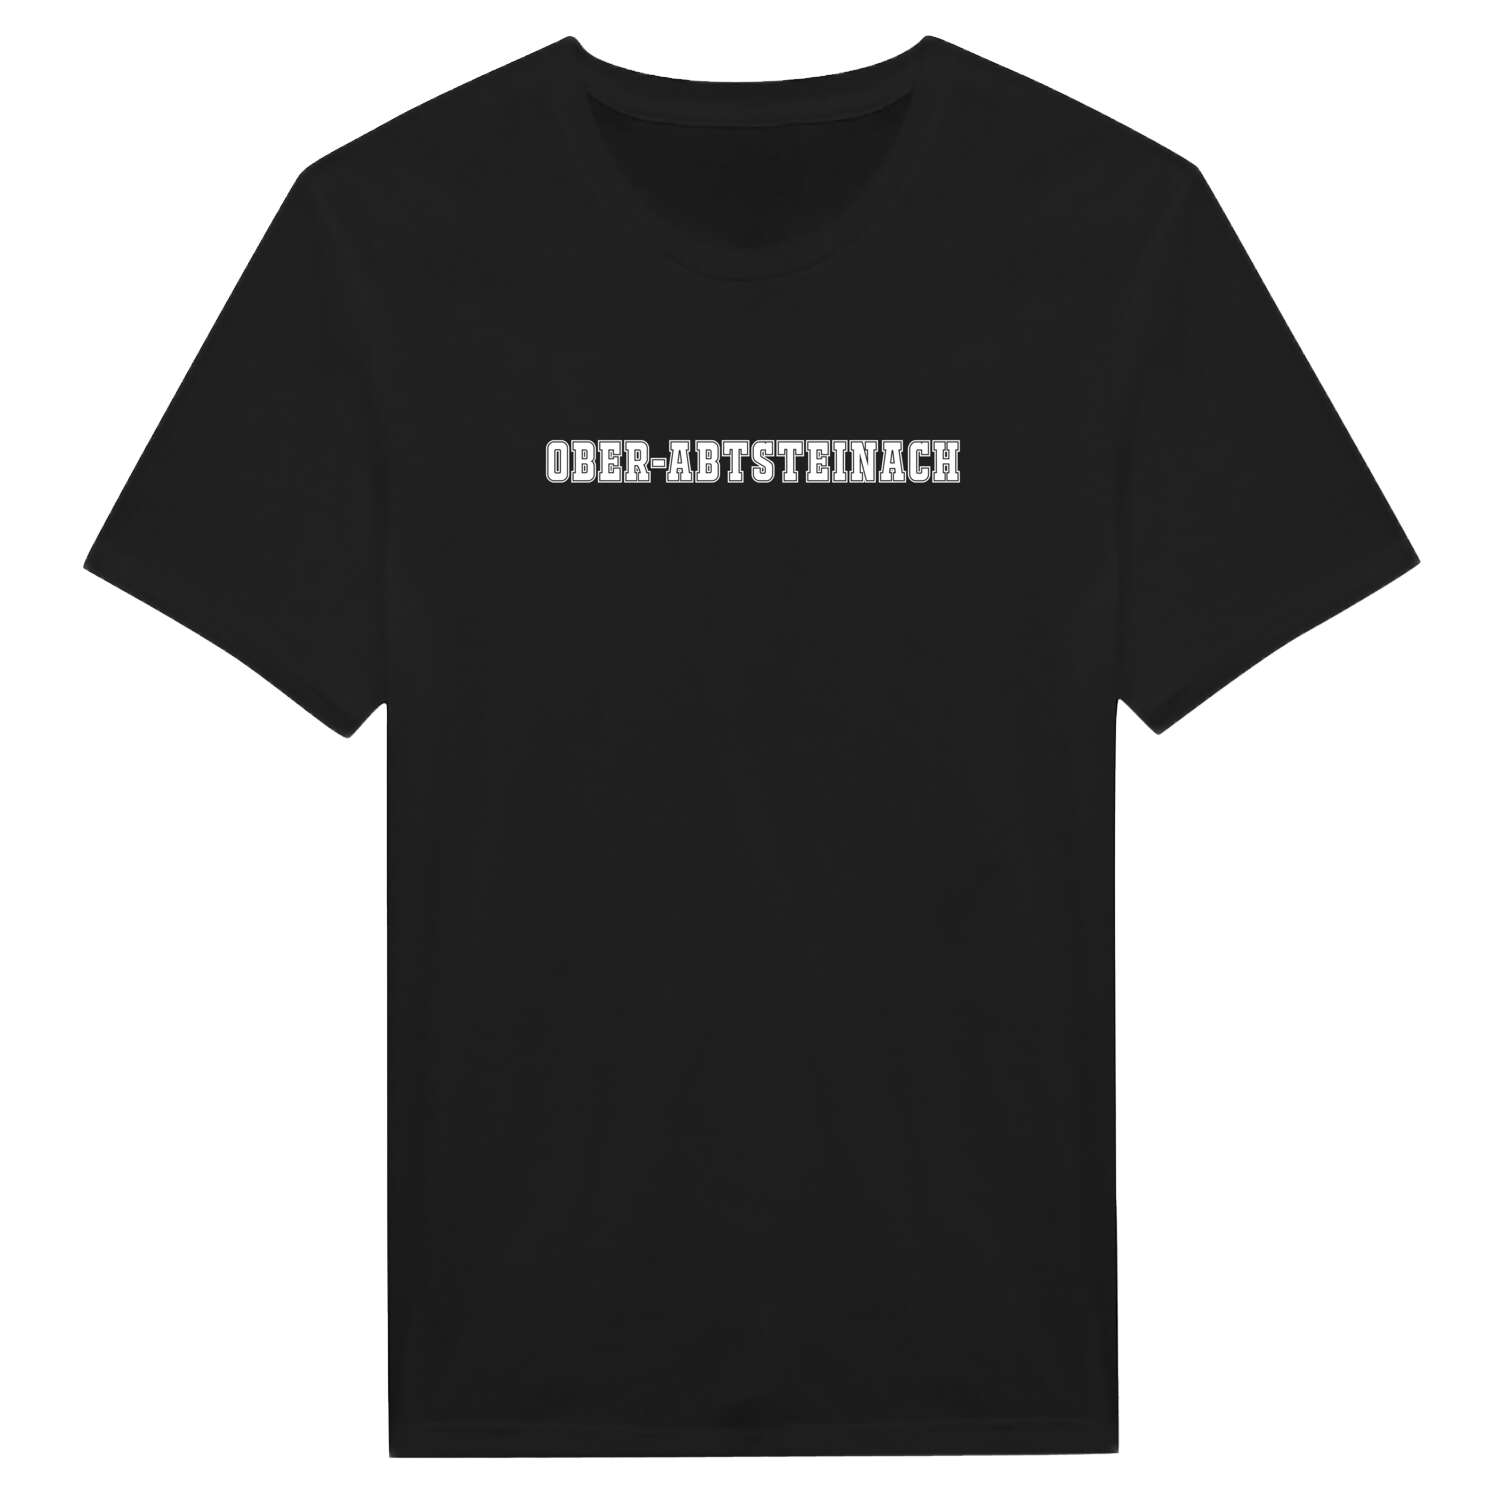 Ober-Abtsteinach T-Shirt »Classic«